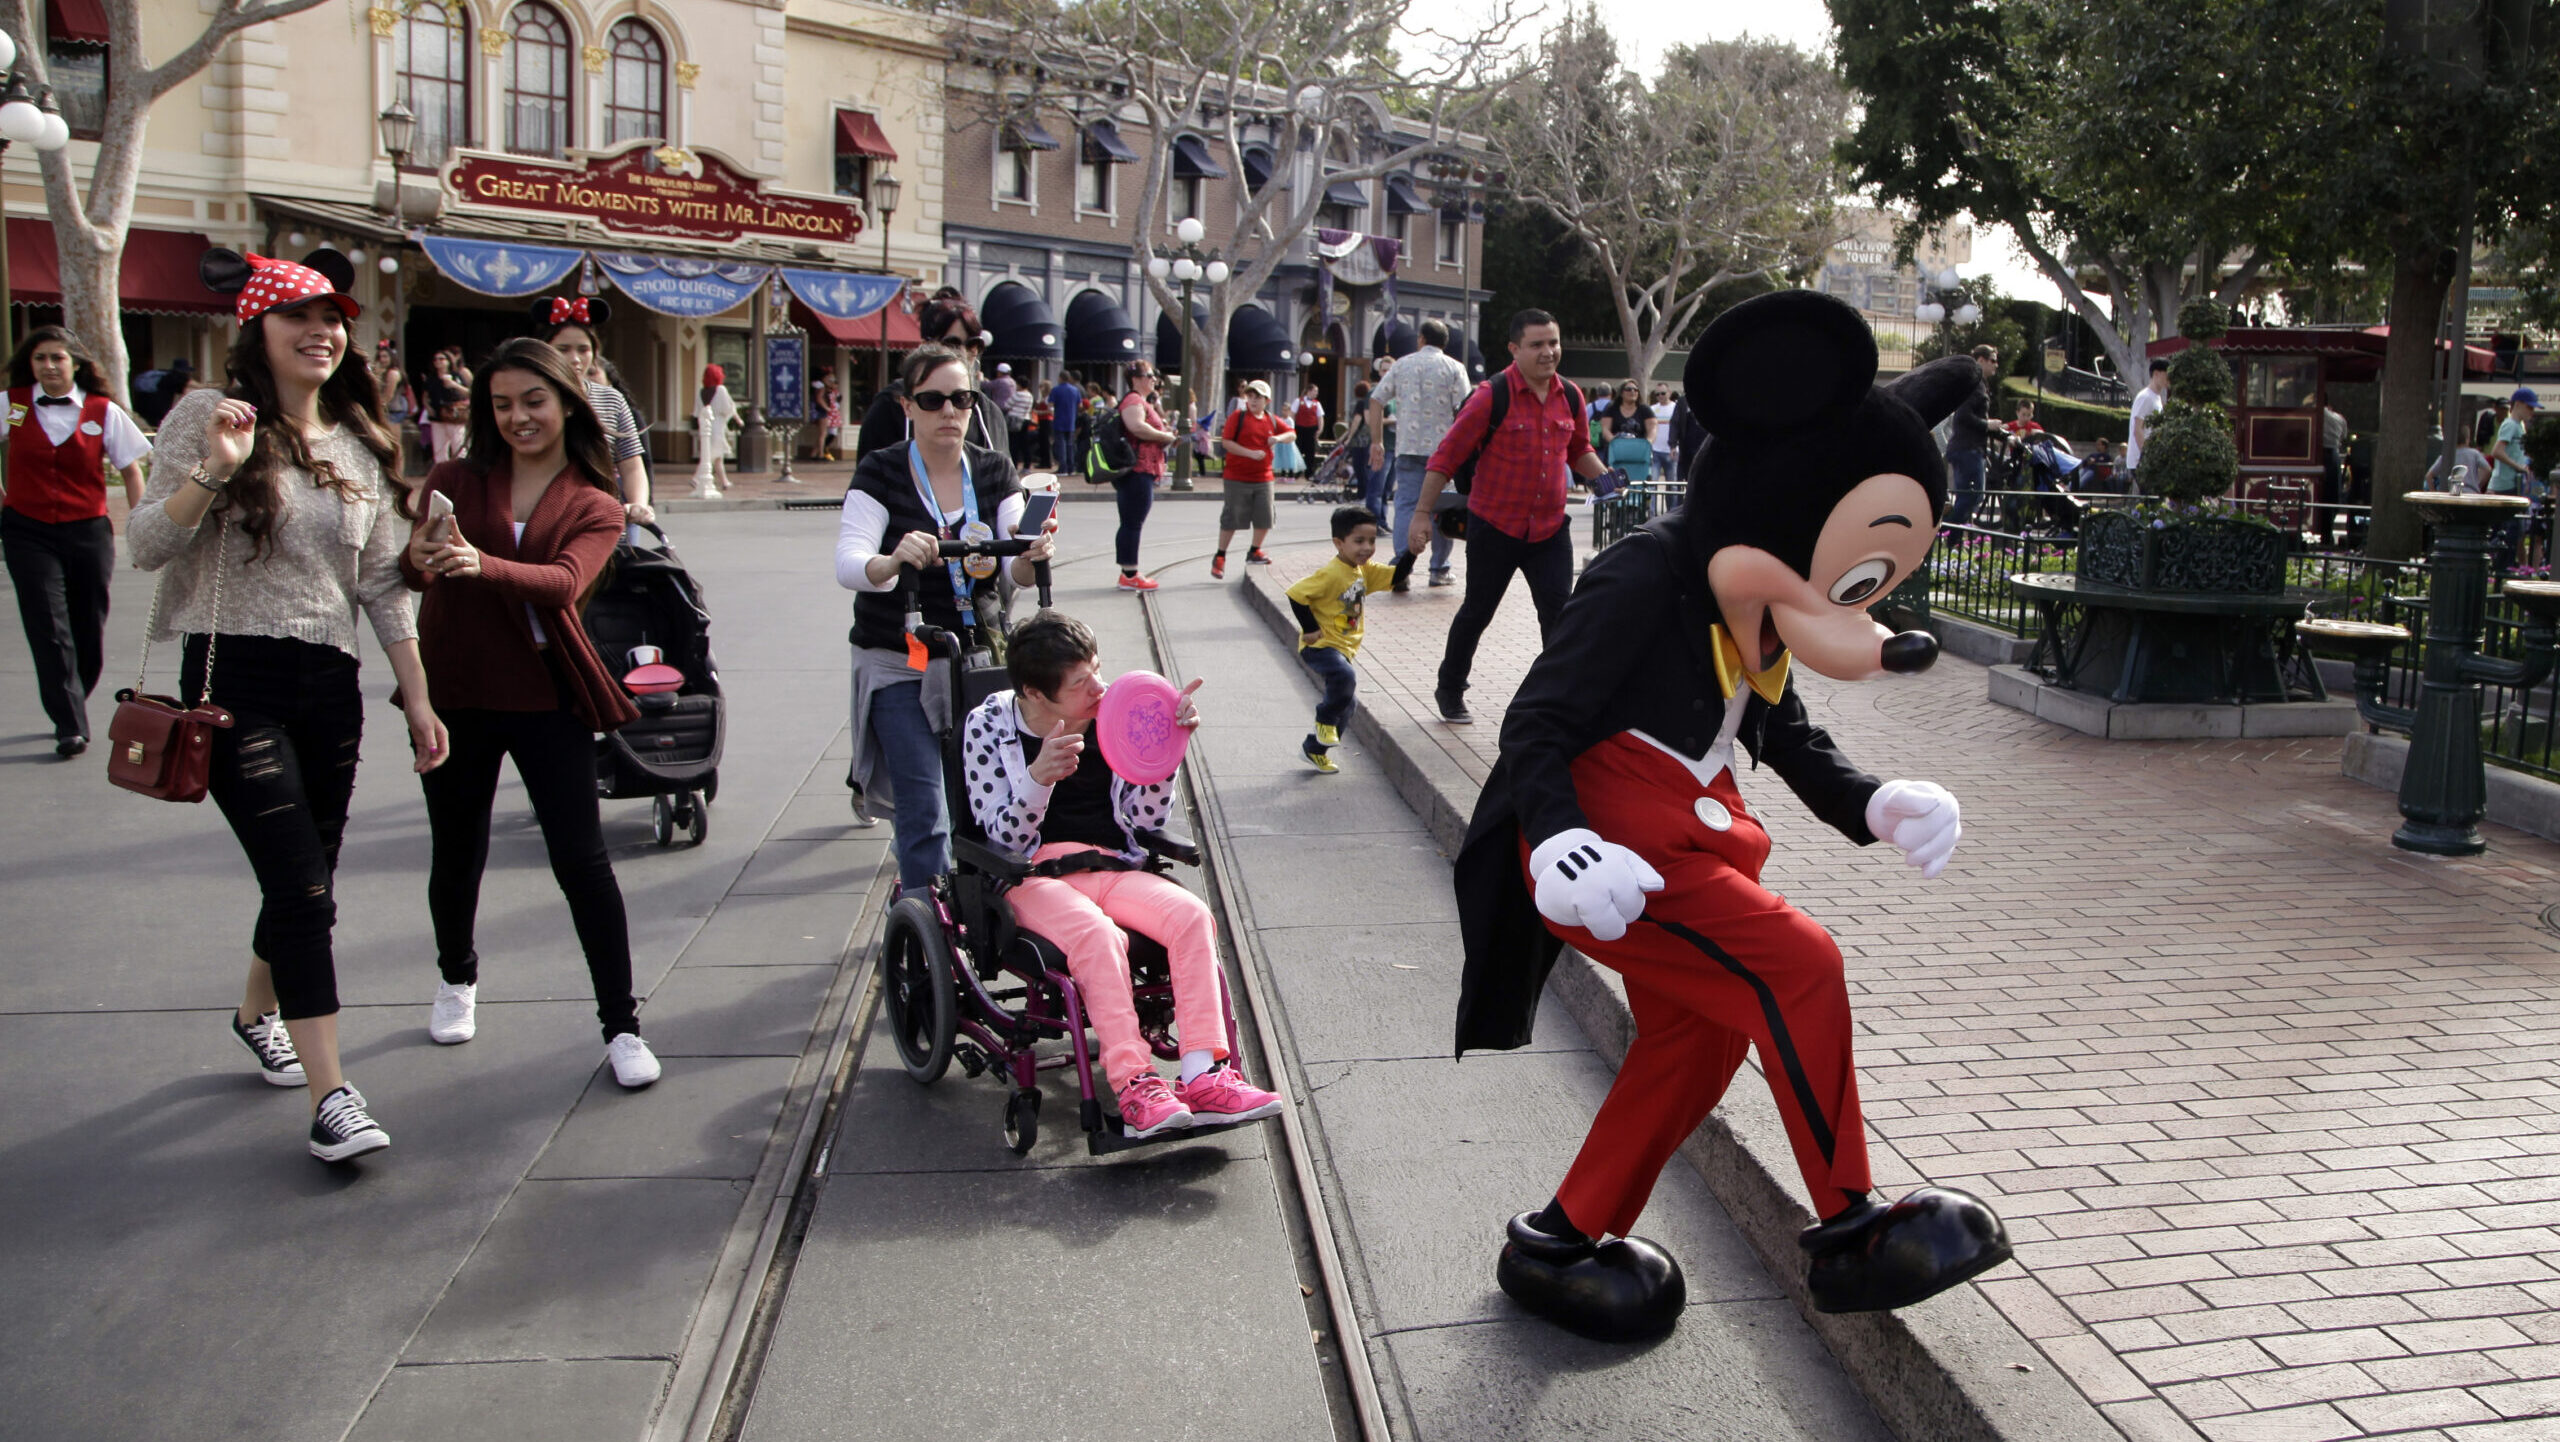 Disneyland character and parade performers in California vote to join
labor union